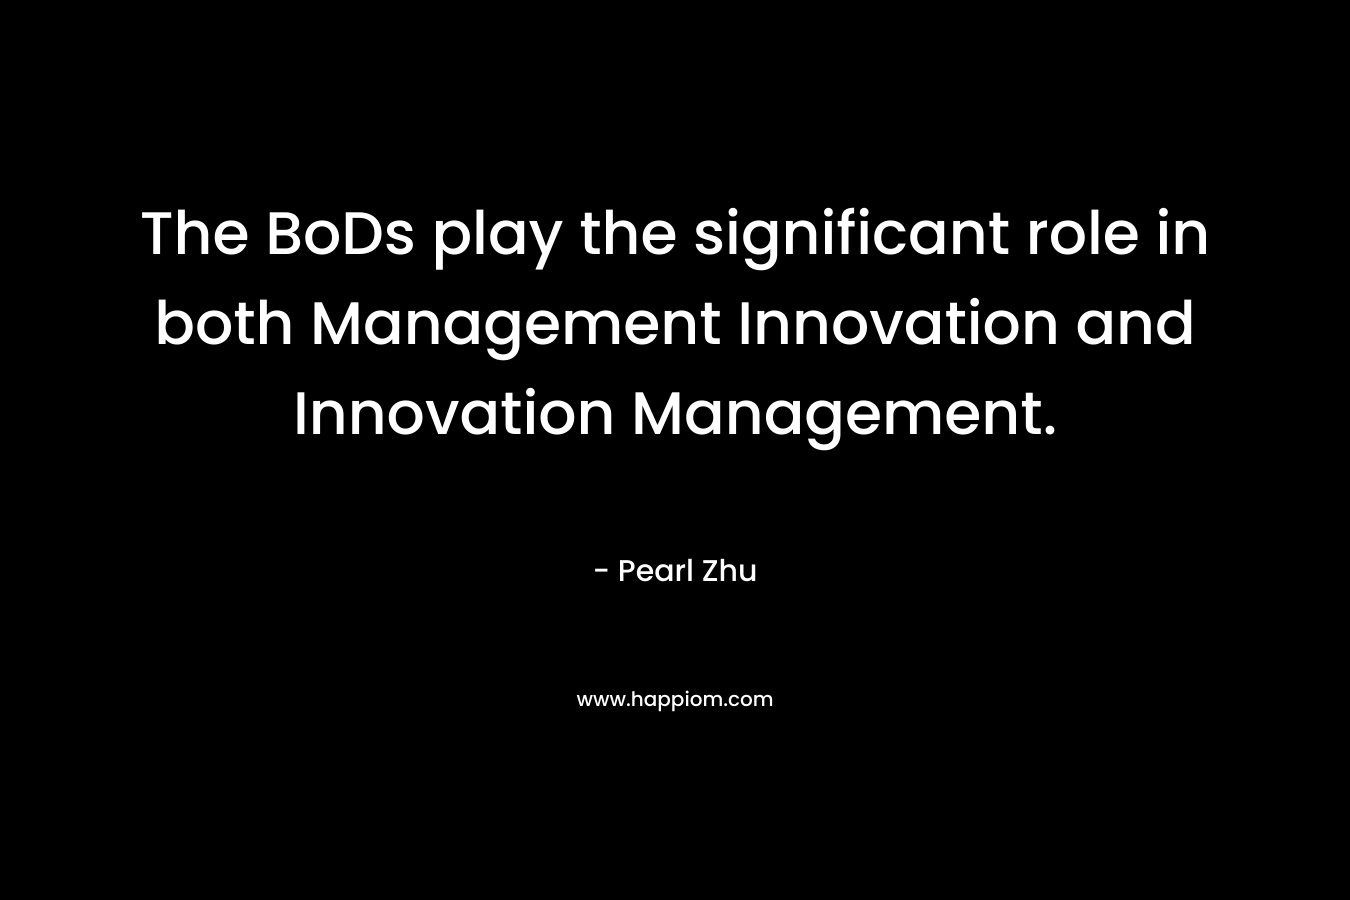 The BoDs play the significant role in both Management Innovation and Innovation Management.